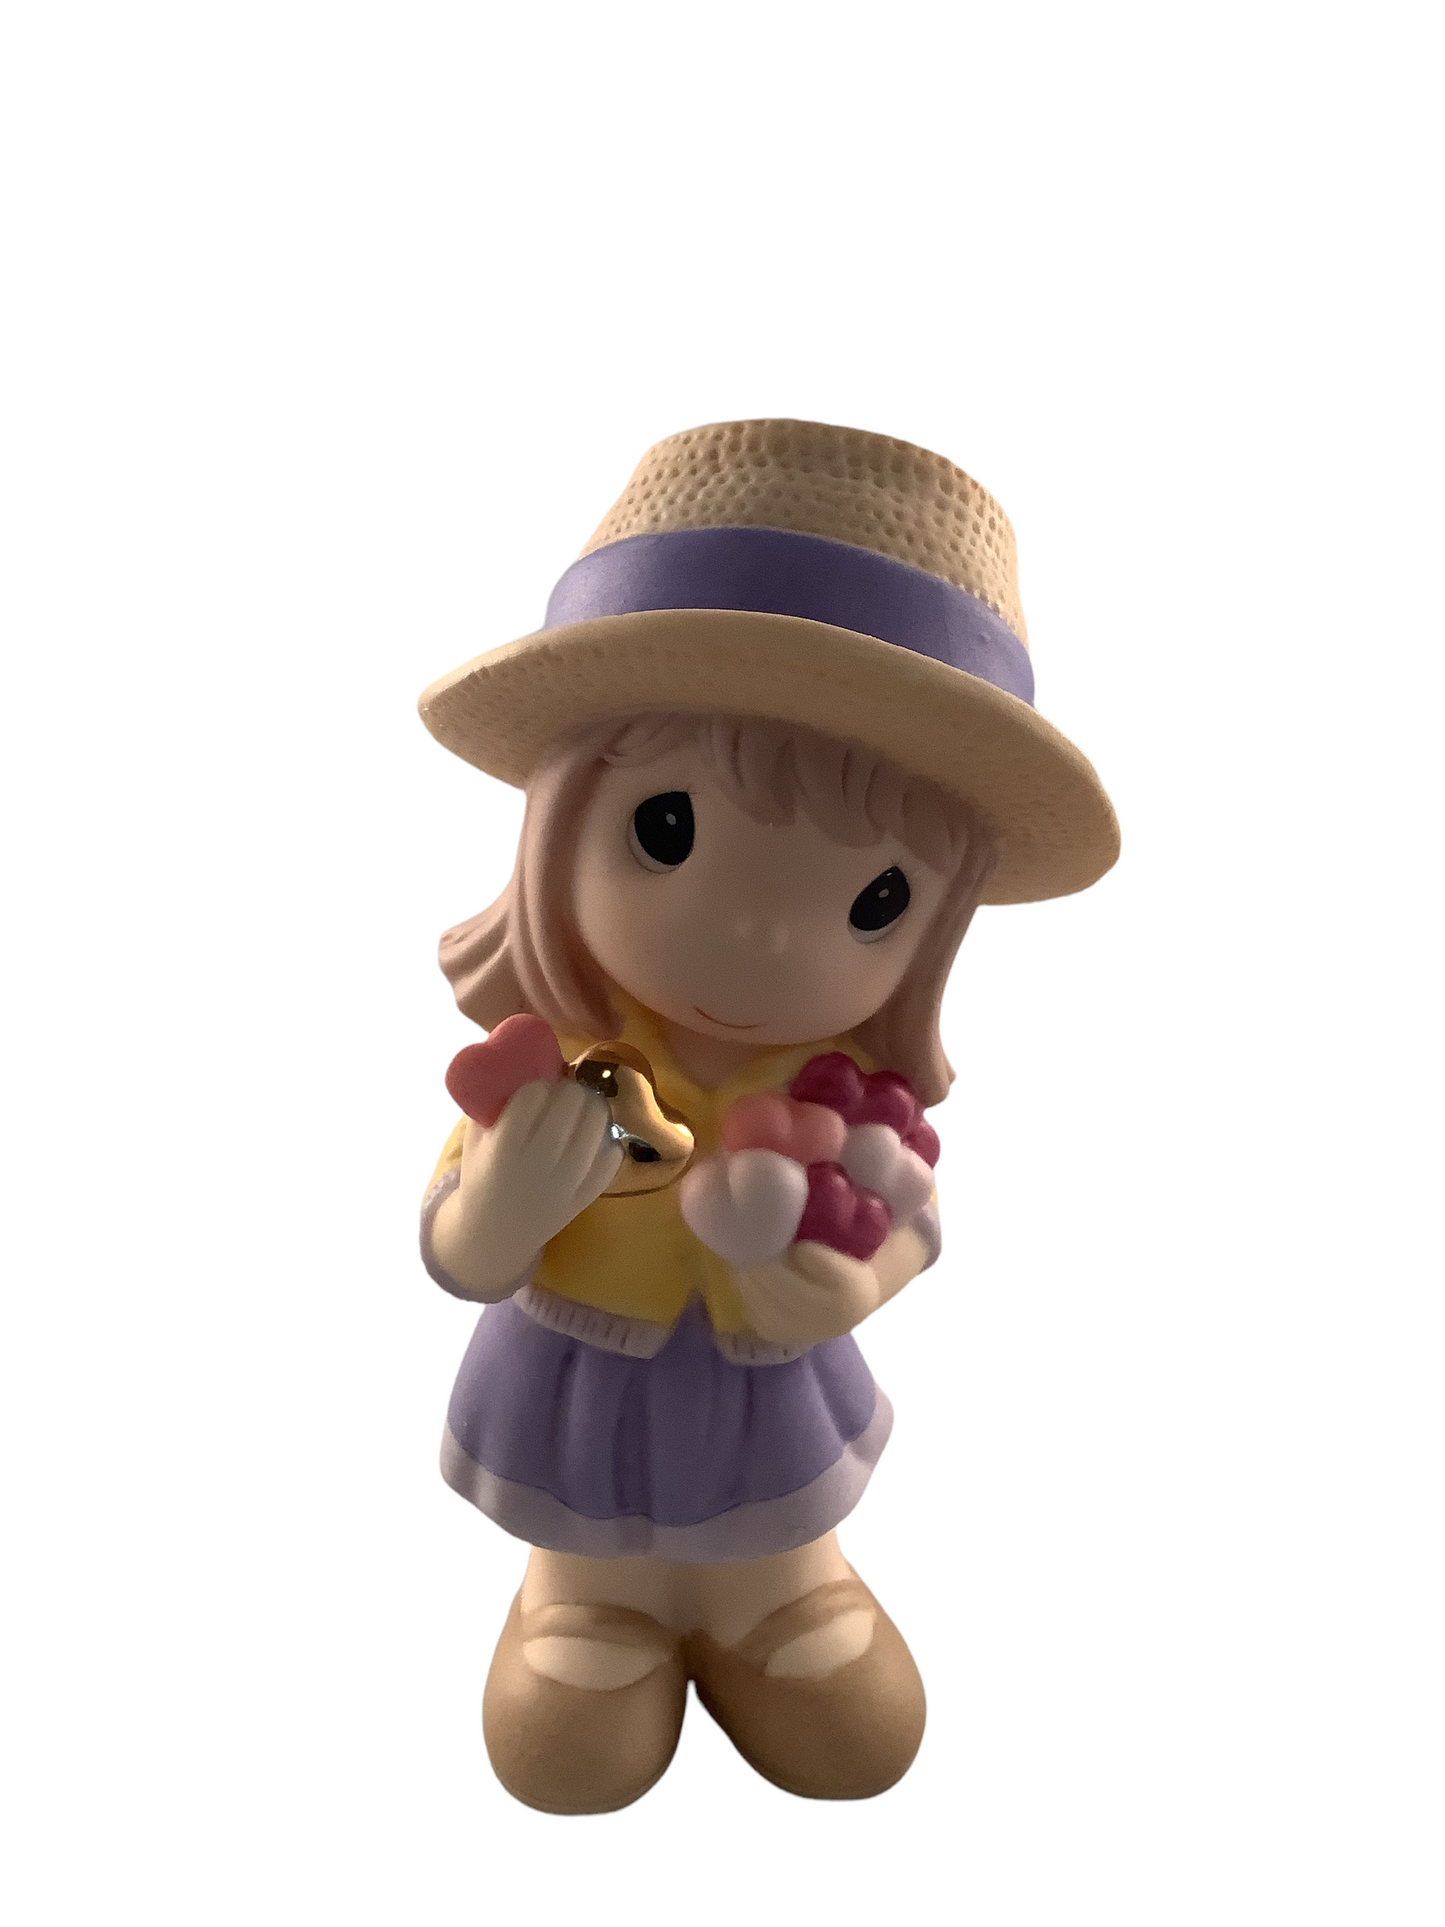 I Count Your Friendship As My Greatest Blessing - Precious Moment Figurine 